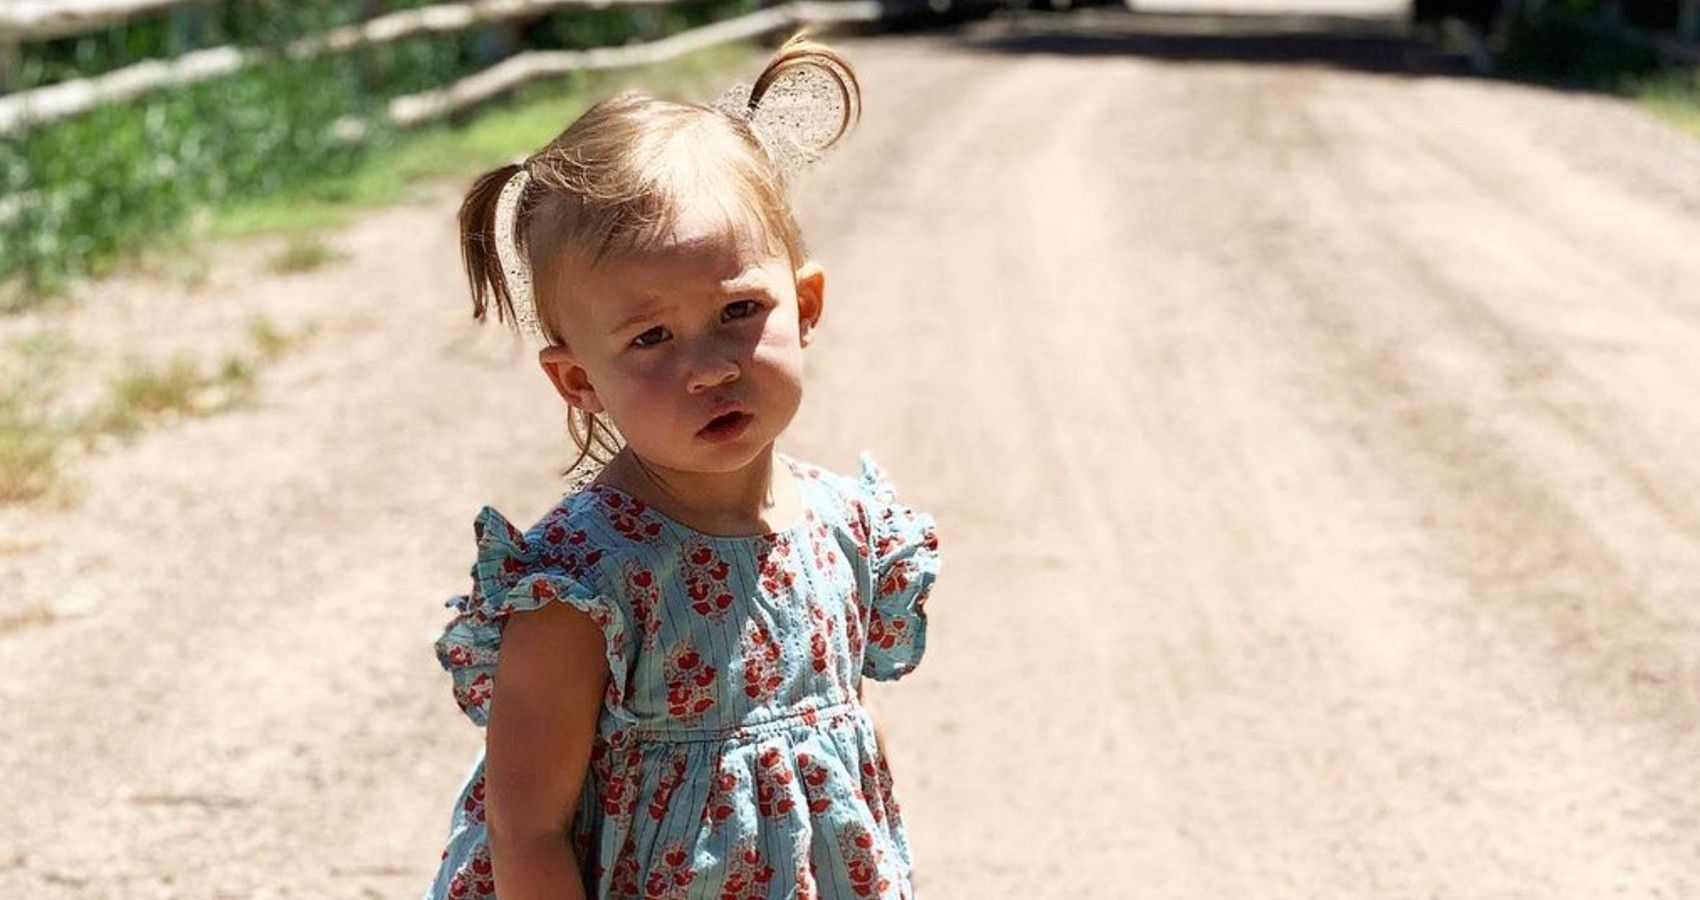 Kate Hudson's daughter standing outside with her hair in pigtails